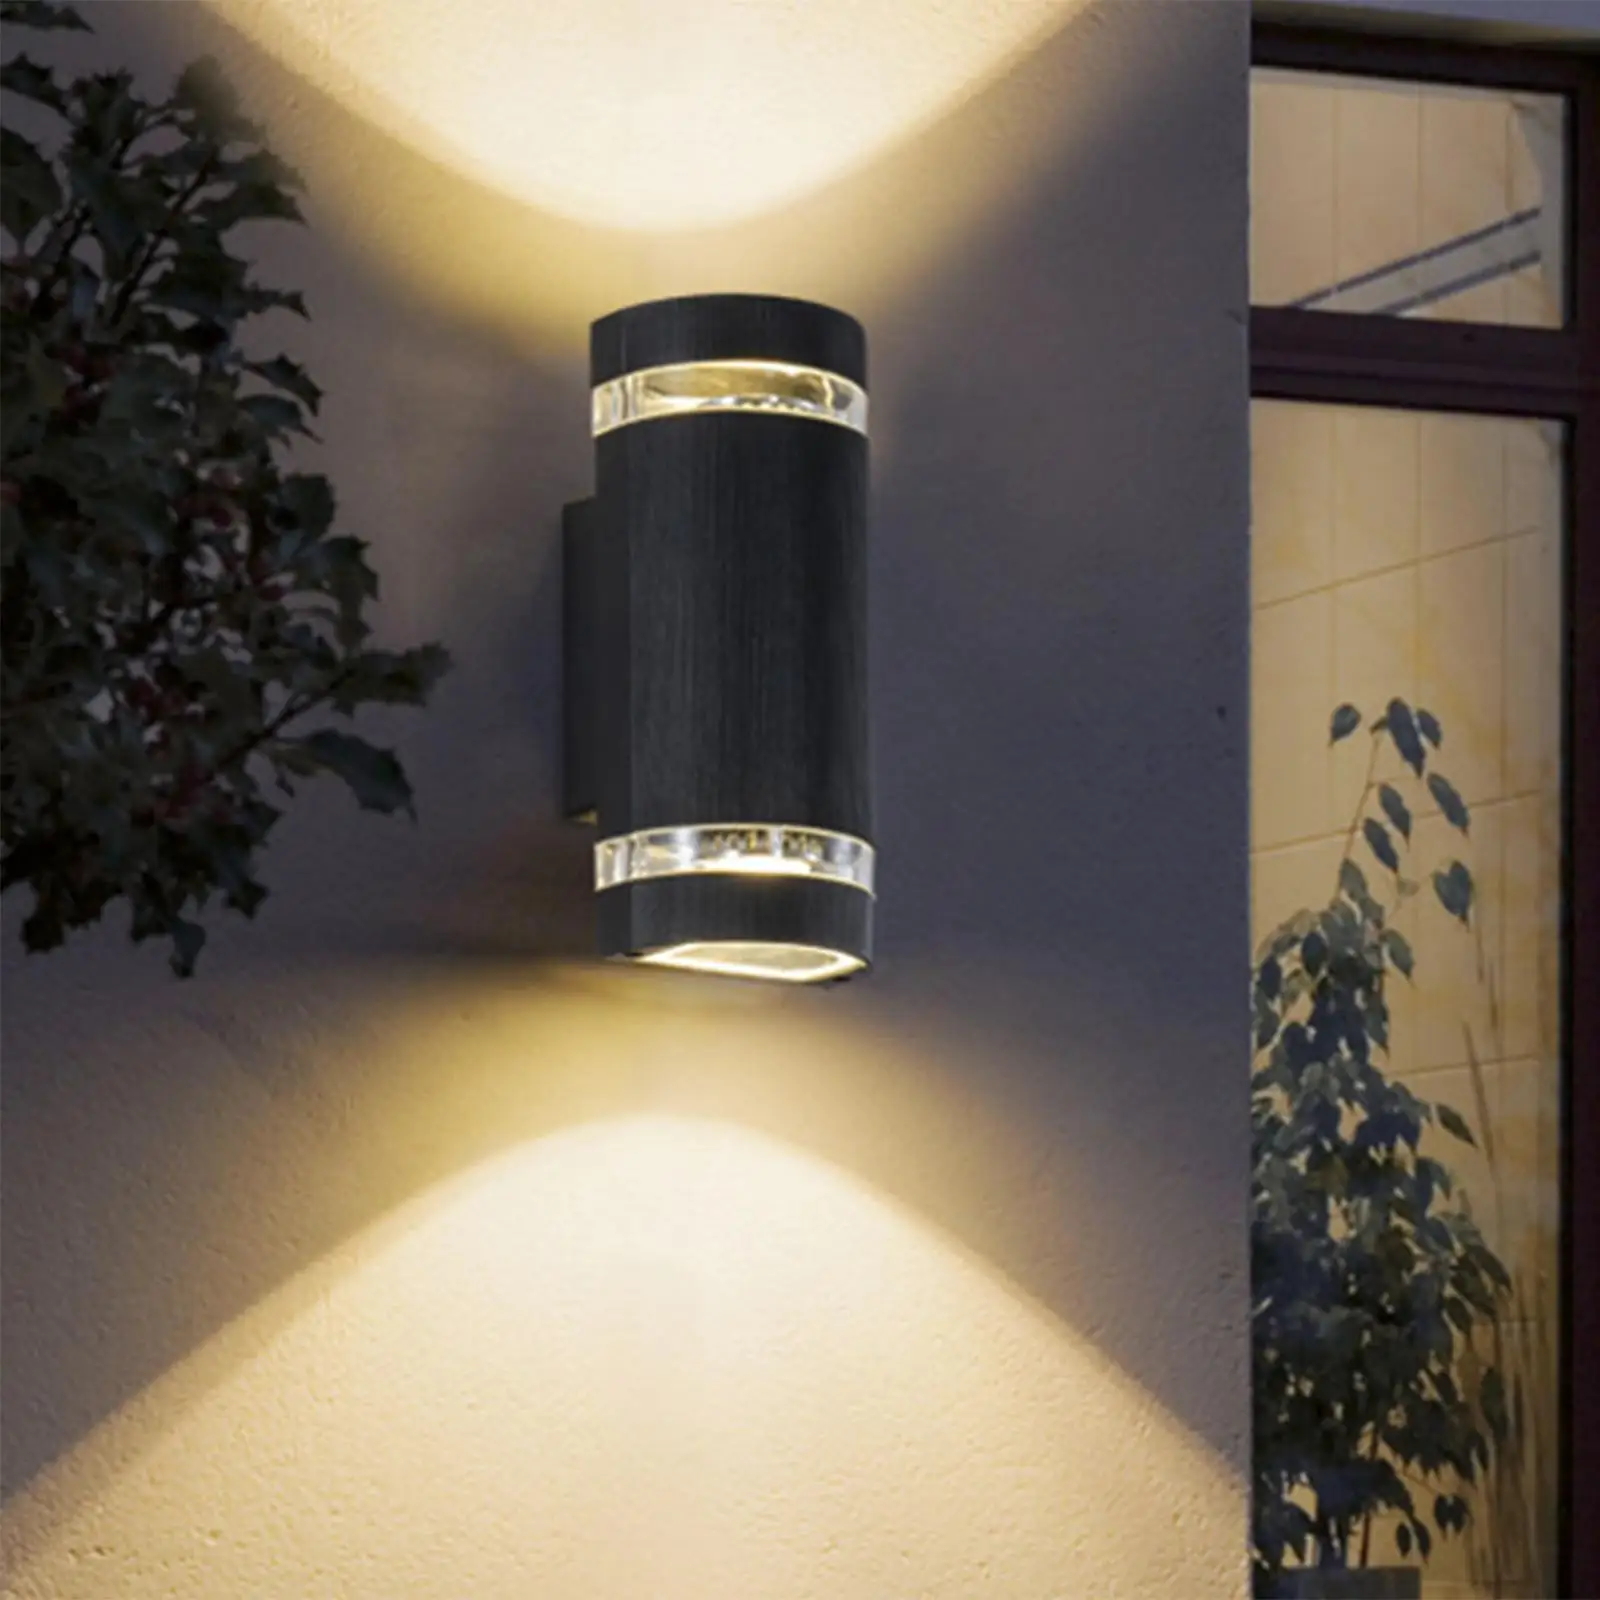 LED Outdoor Up and Down Wall Mounted Light Aluminum Garden Porch Yard Square Lamp Kitchen Cabinet Decoration Lighting